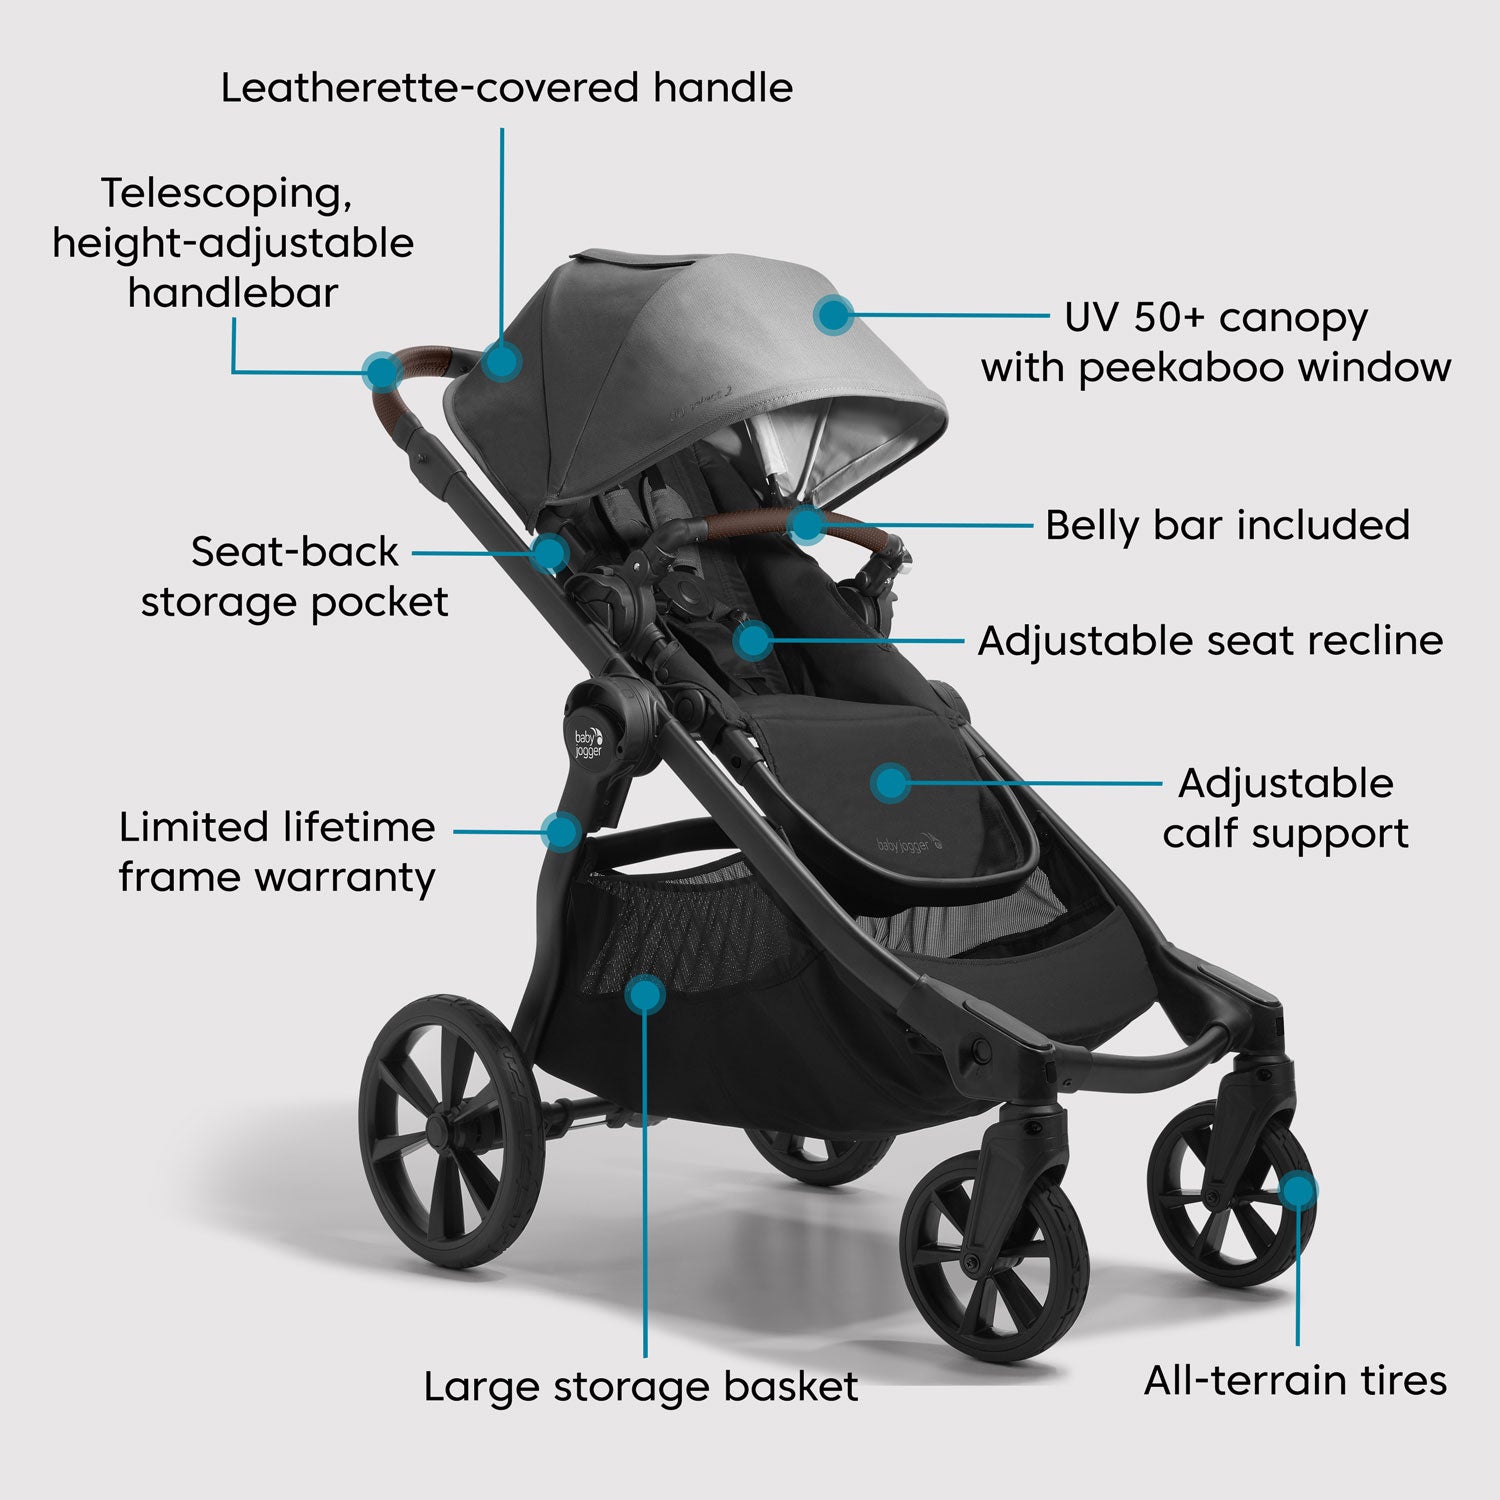 Baby Jogger City Select 2 Stroller - Lunar Black features